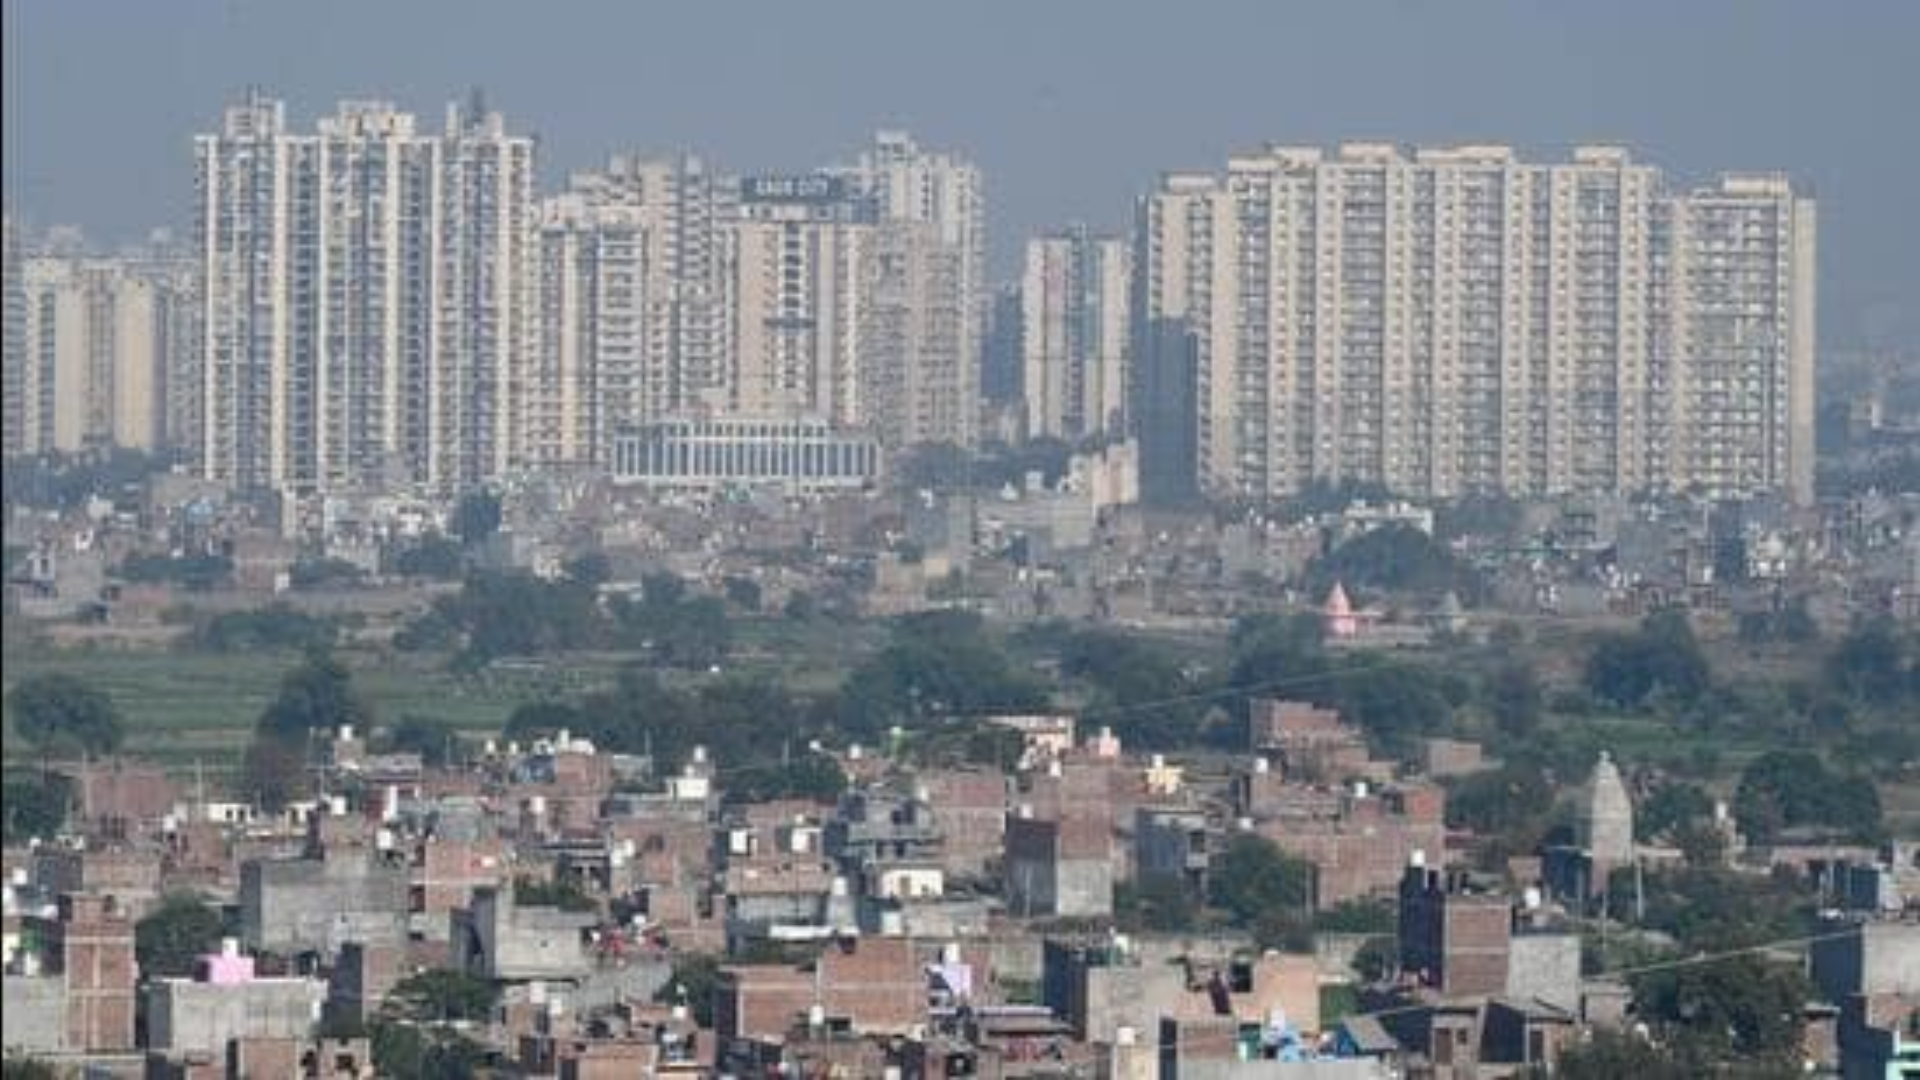 56,000 Sq m Land Released From Illegal Colonial Encroachment: Noida